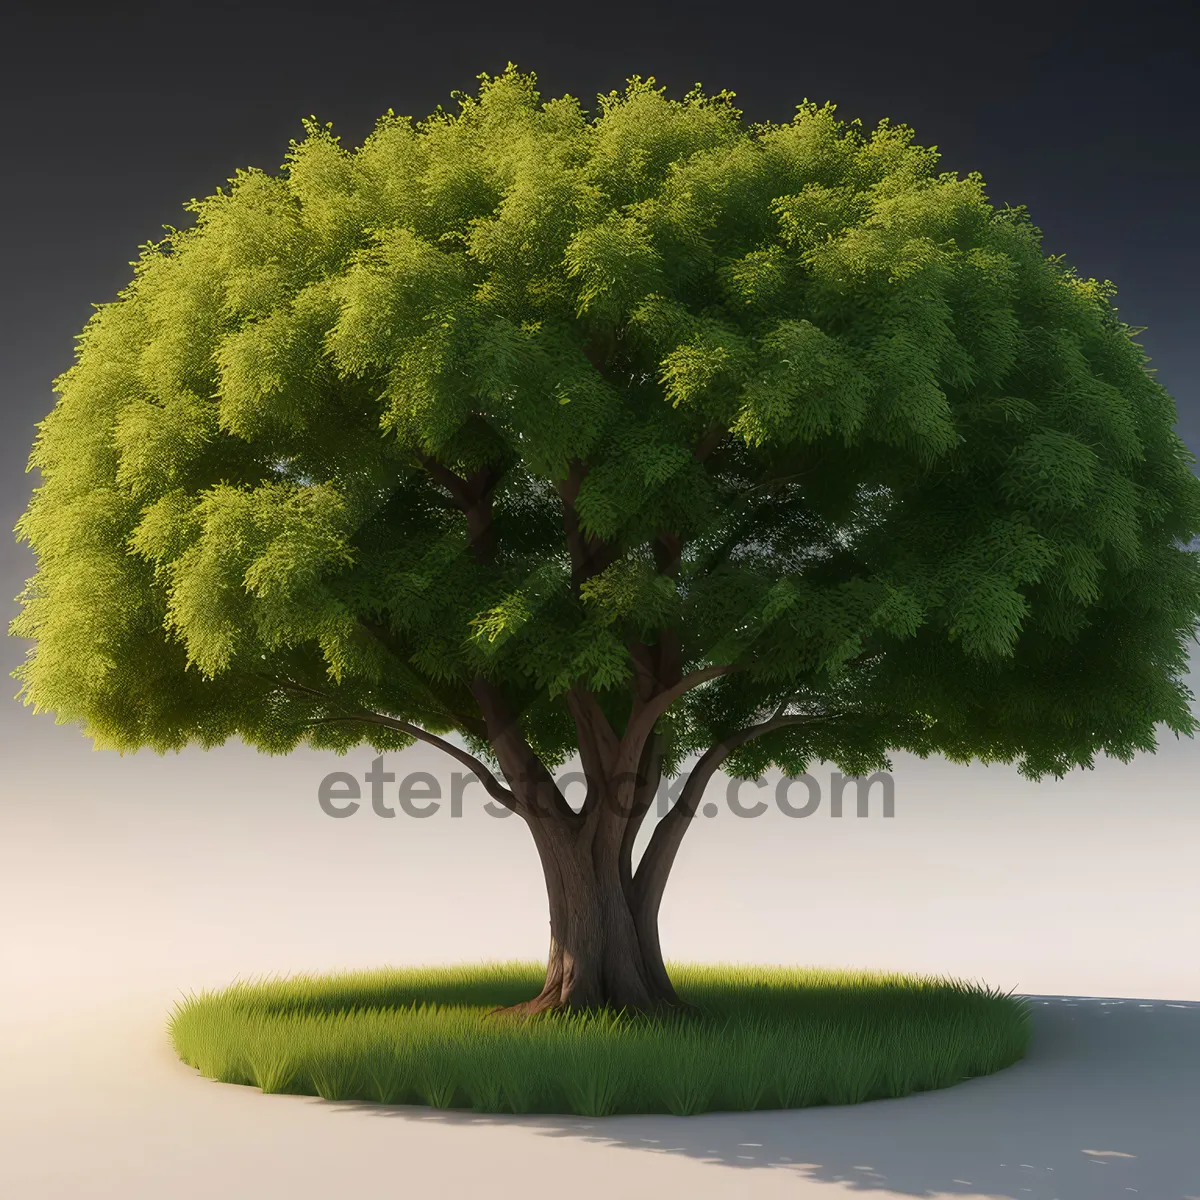 Picture of Natural Miniature Oak Tree in Summer Garden